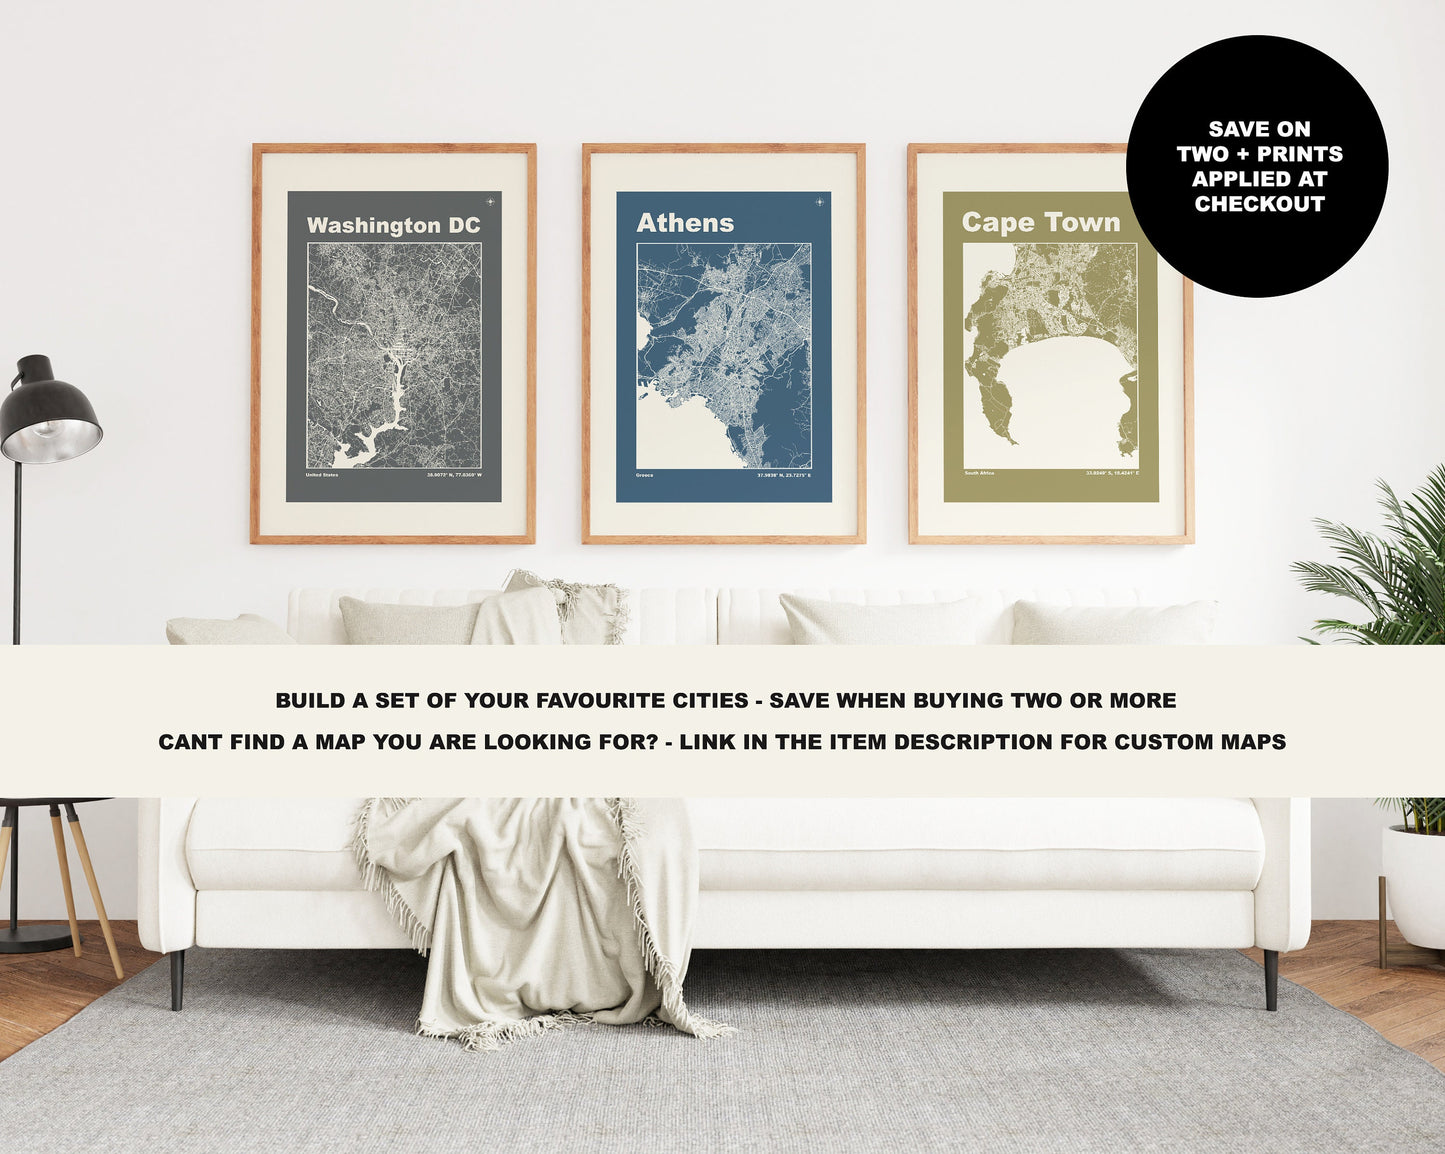 Exmouth Print - Map Print - Mid Century Modern  - Retro - Vintage - Contemporary - Exmouth Print - Map - Map Poster - Gift - Devon